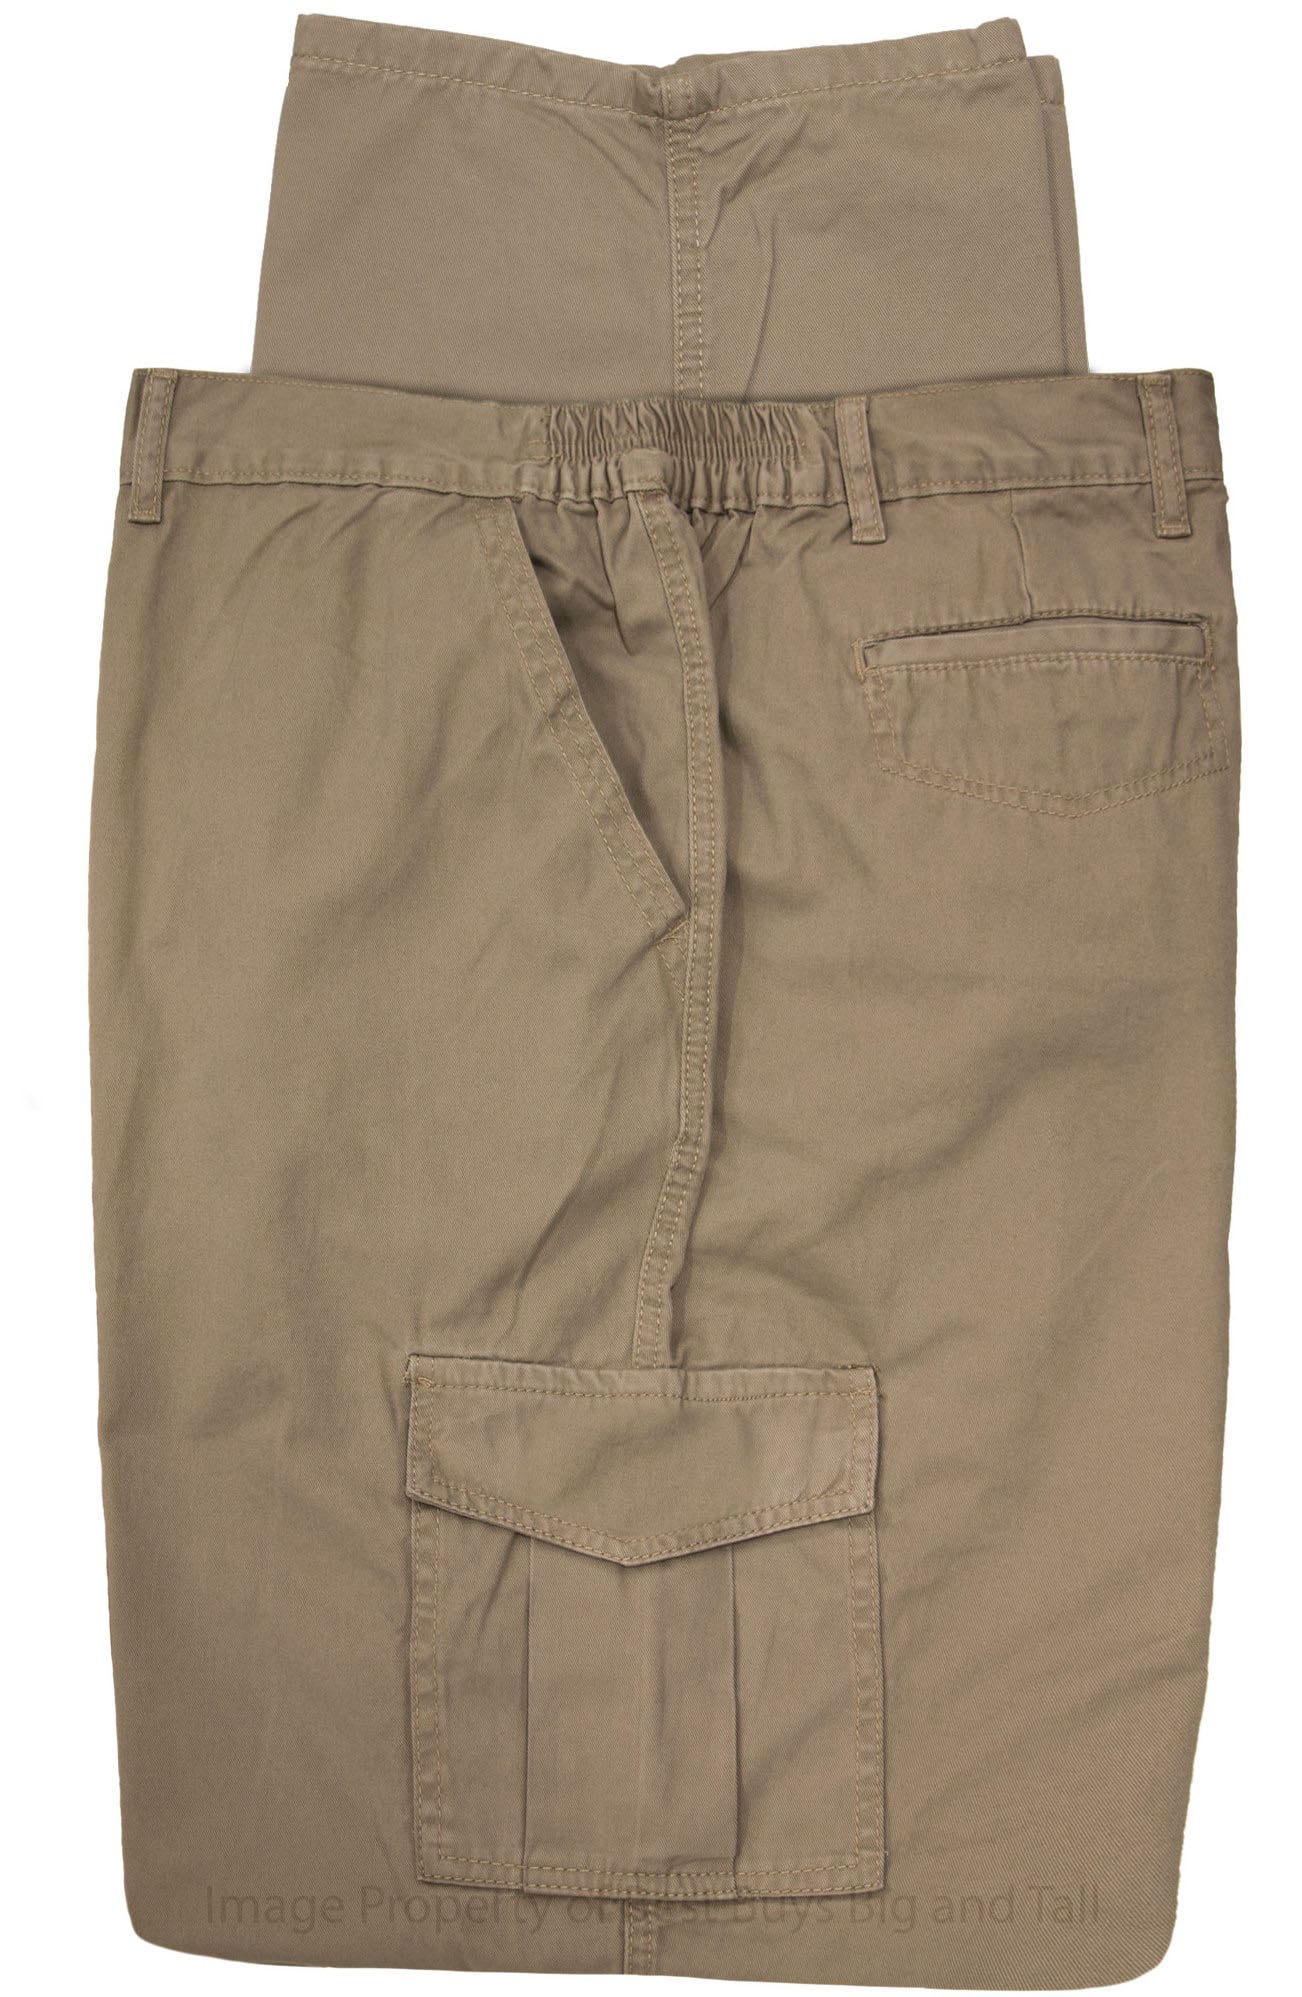 Mens Big & Tall Cargo Pants by FullBlue 